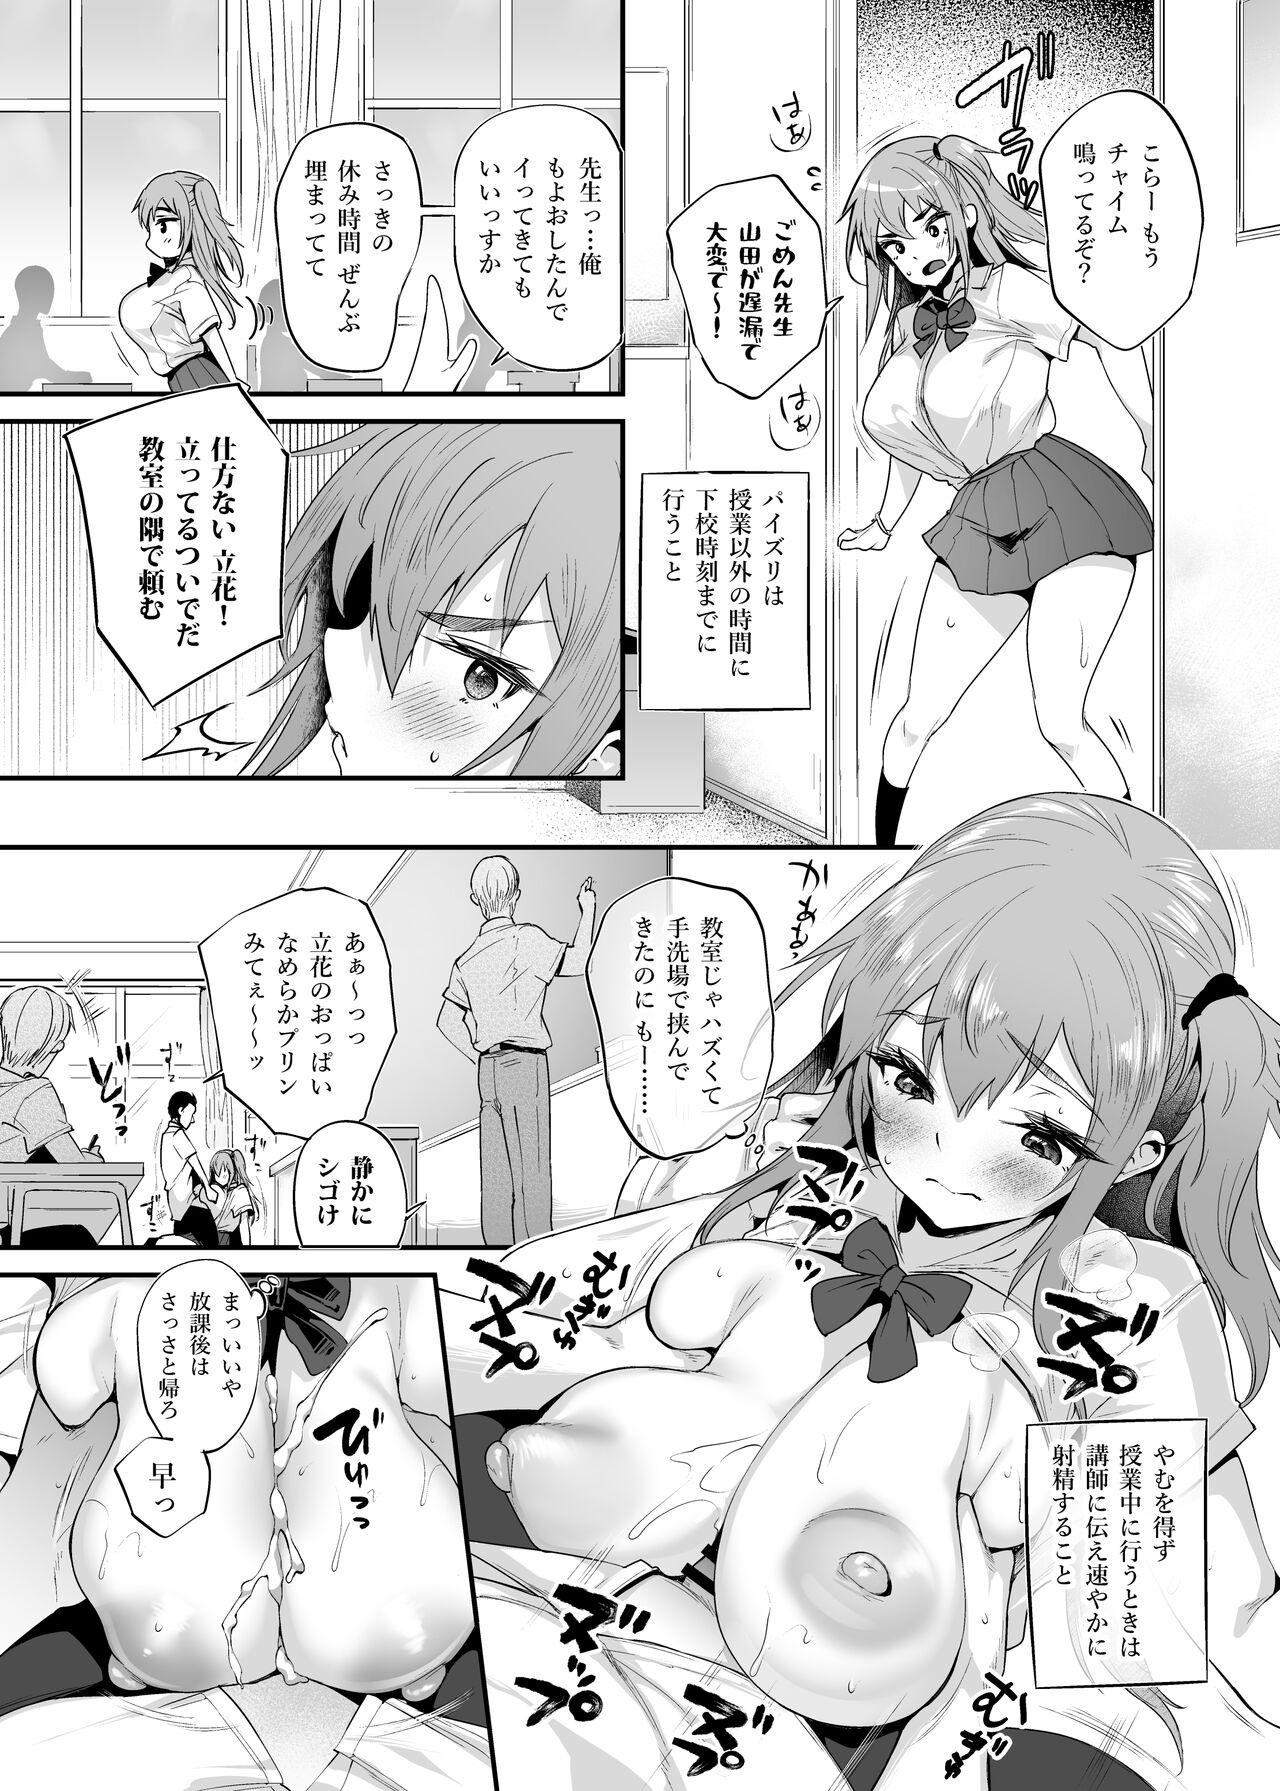 Natural Boobs 「環境美化委員がパイズリする決まりのある学園」 Chick - Picture 3